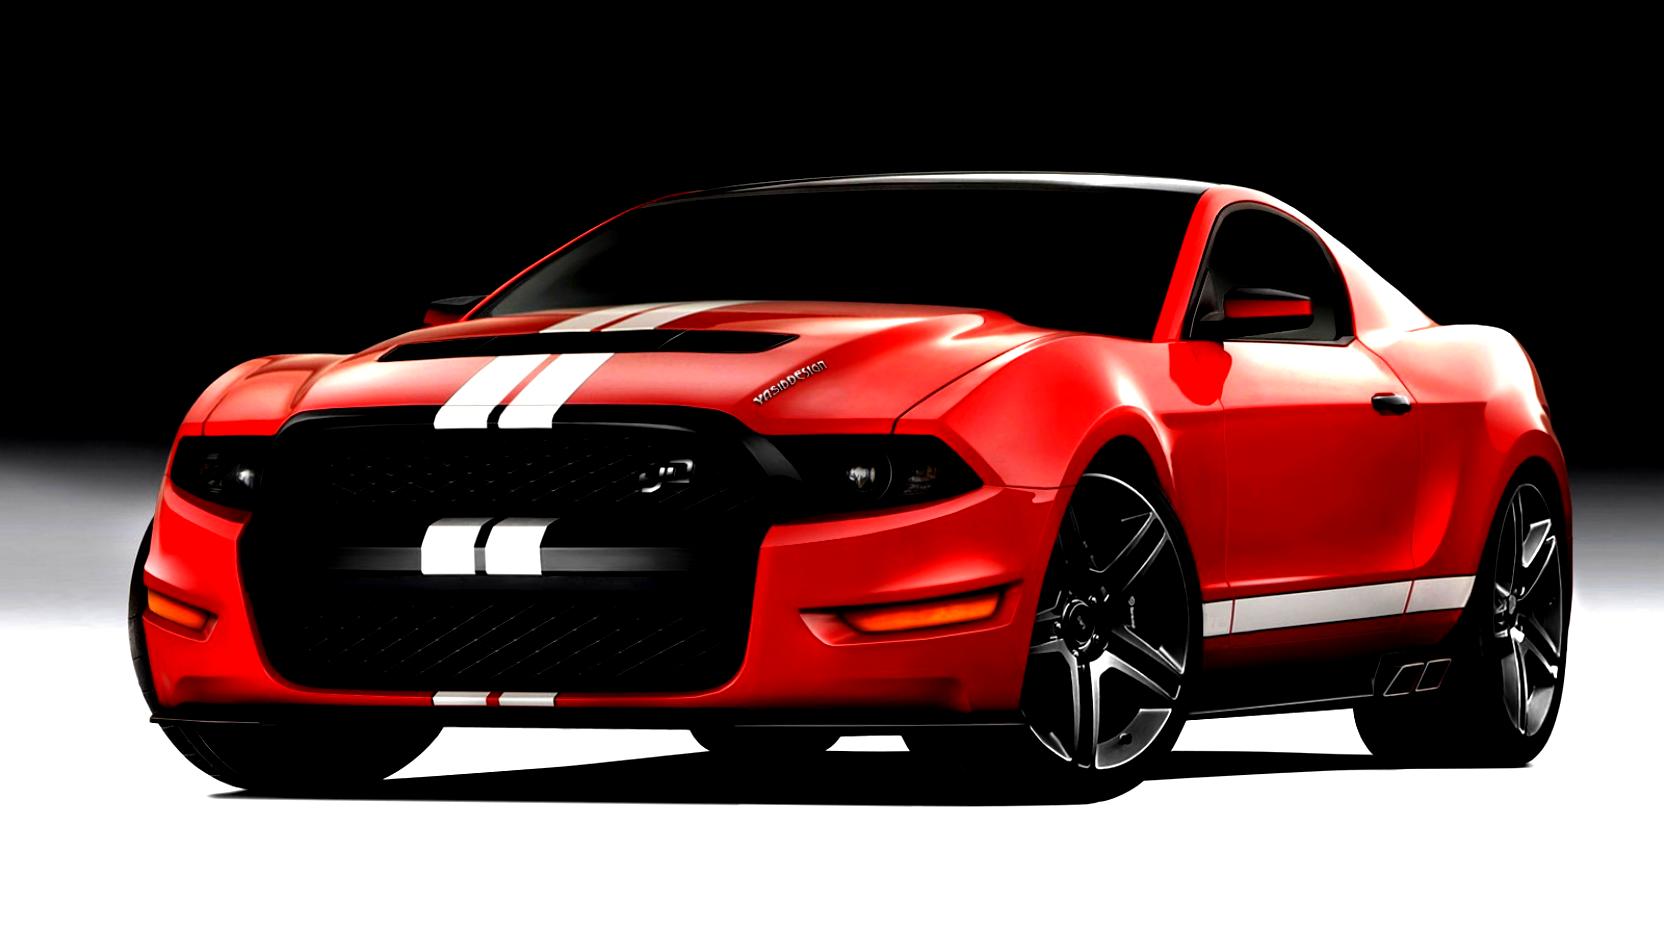 Ford Mustang 2014 #157